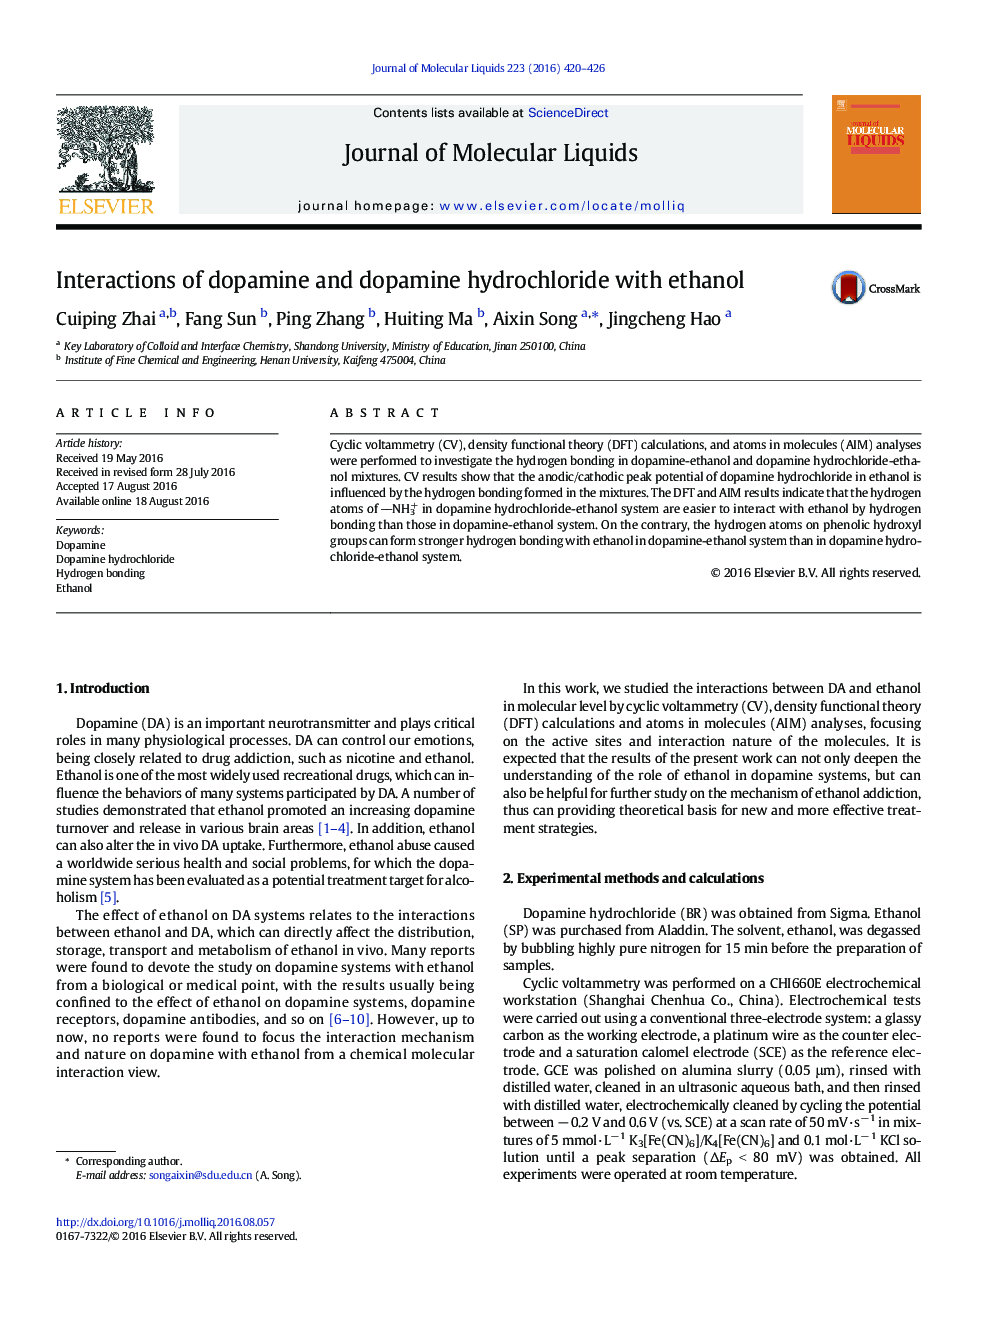 Interactions of dopamine and dopamine hydrochloride with ethanol